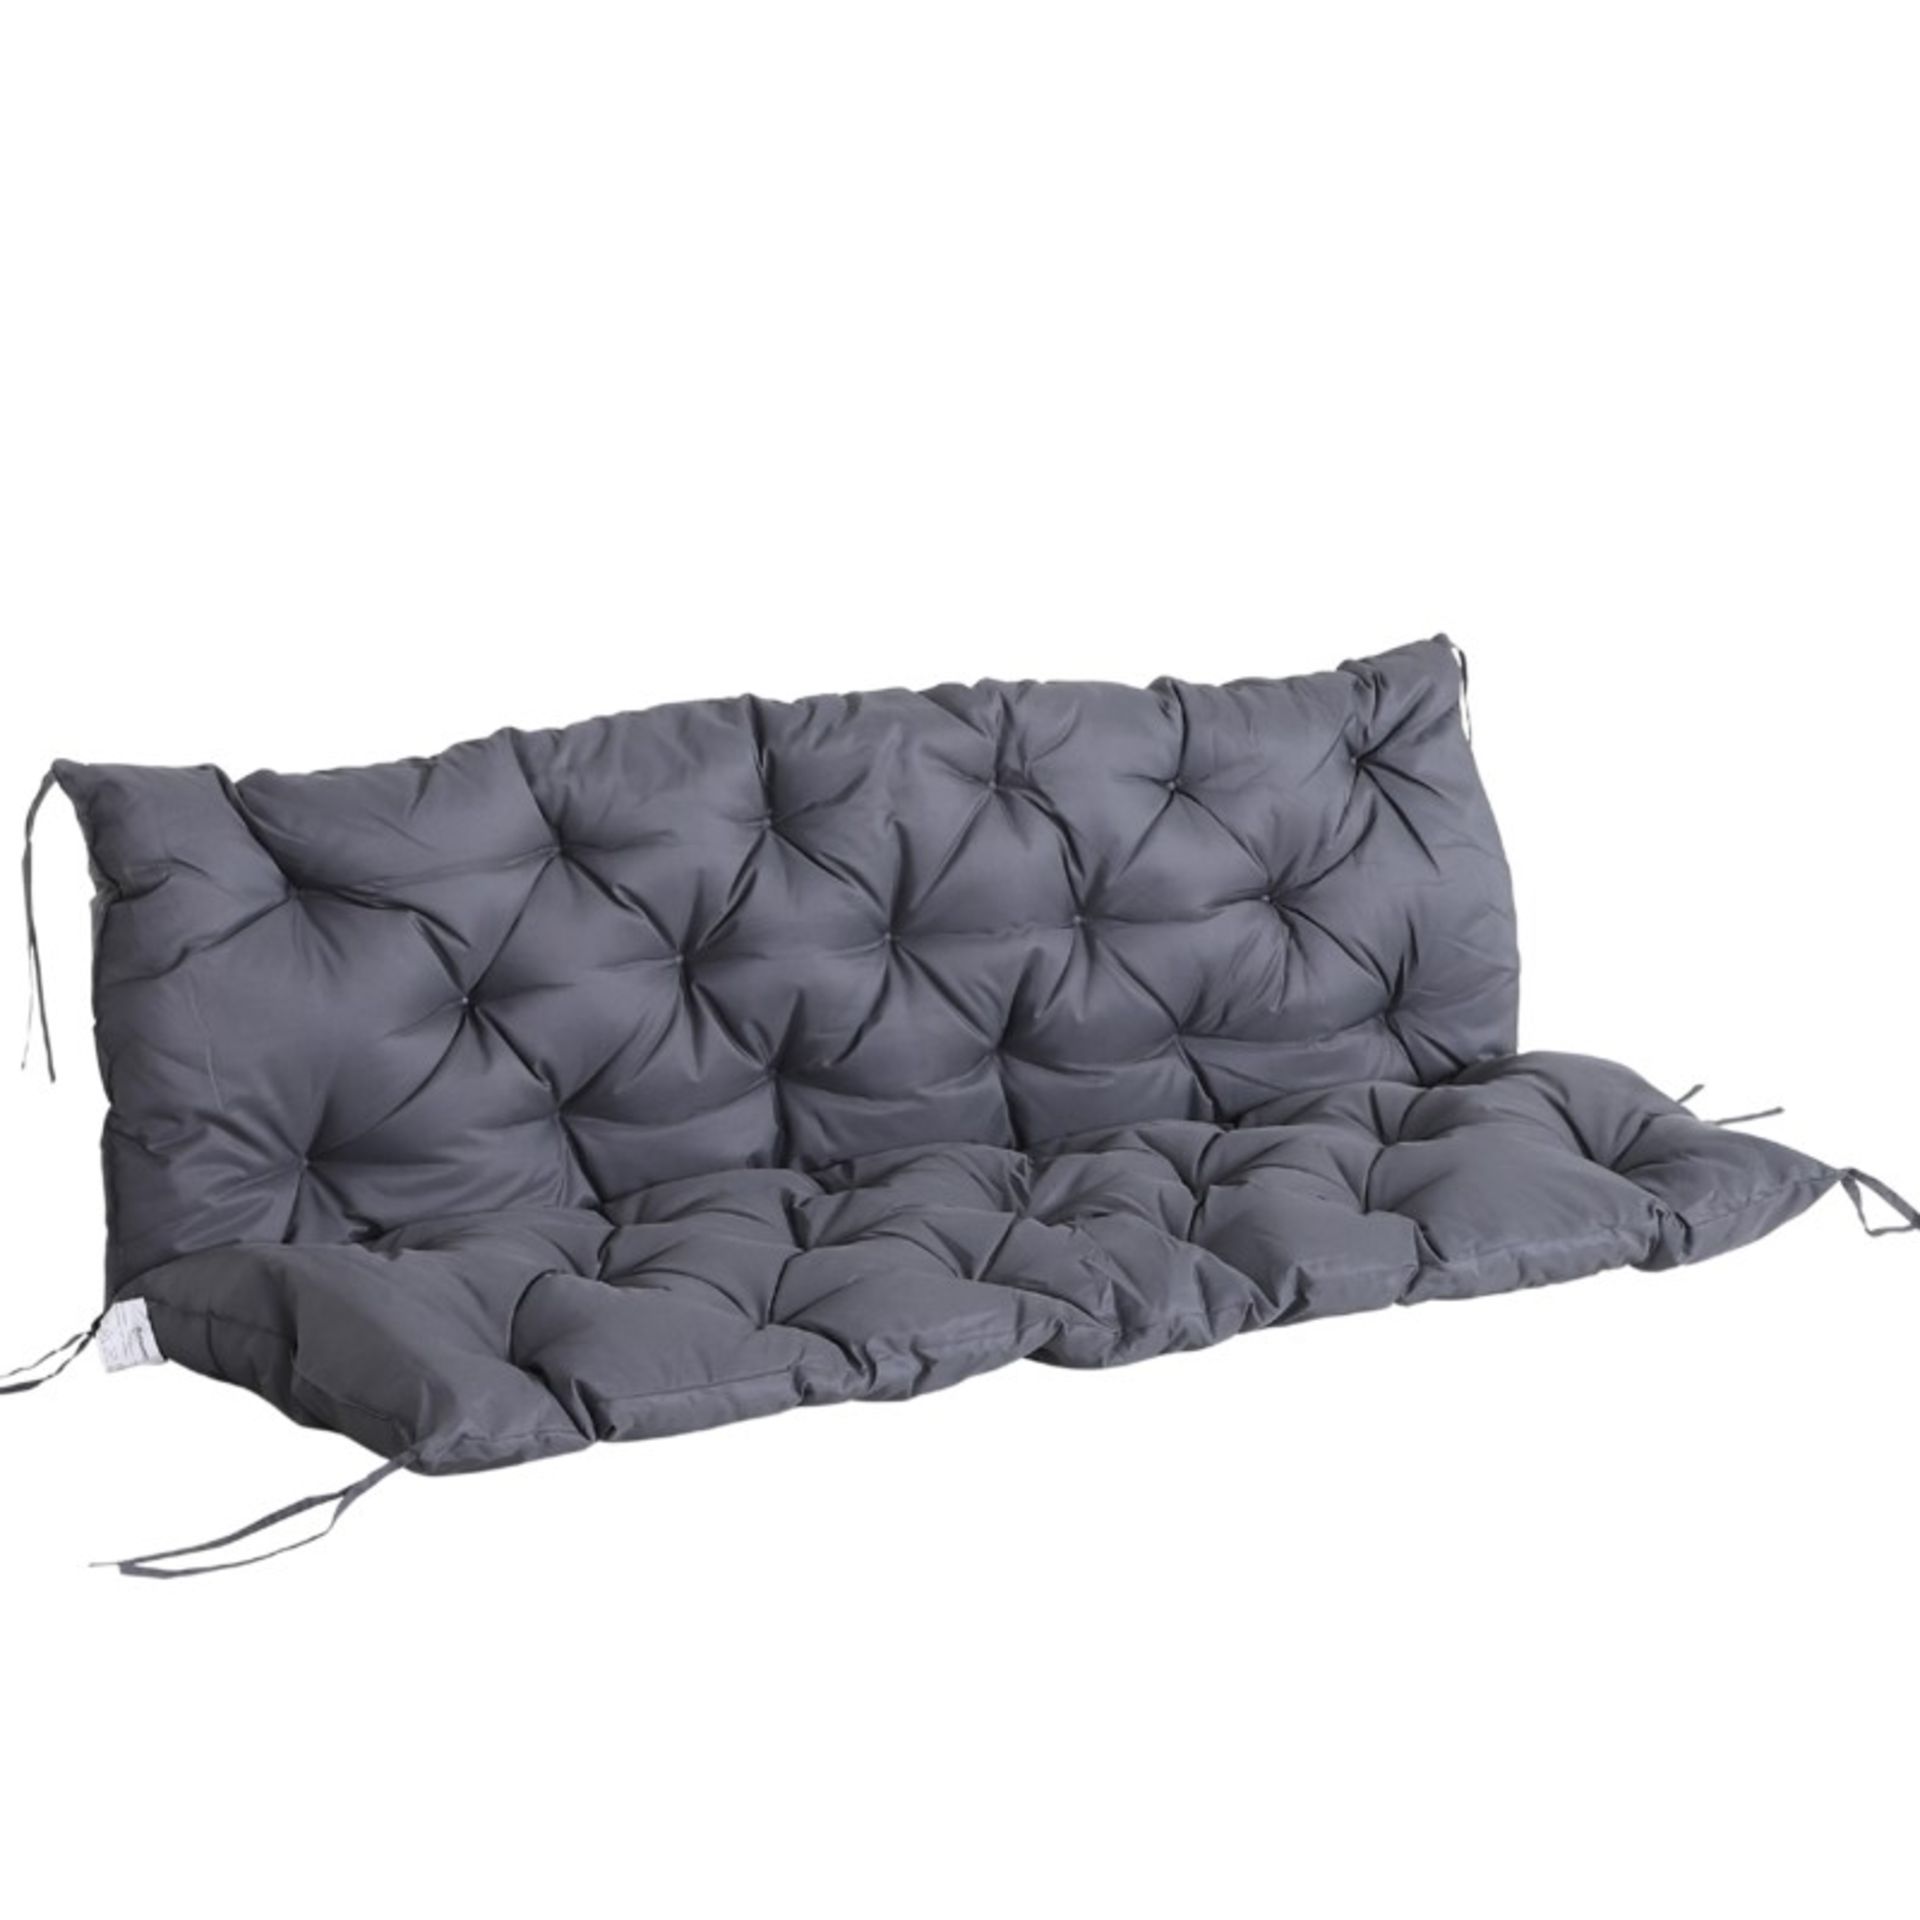 RRP £63.99 - Oxford Fabrics Tufted 3 Seater Swing Chair Cushion Grey - only the cushion.